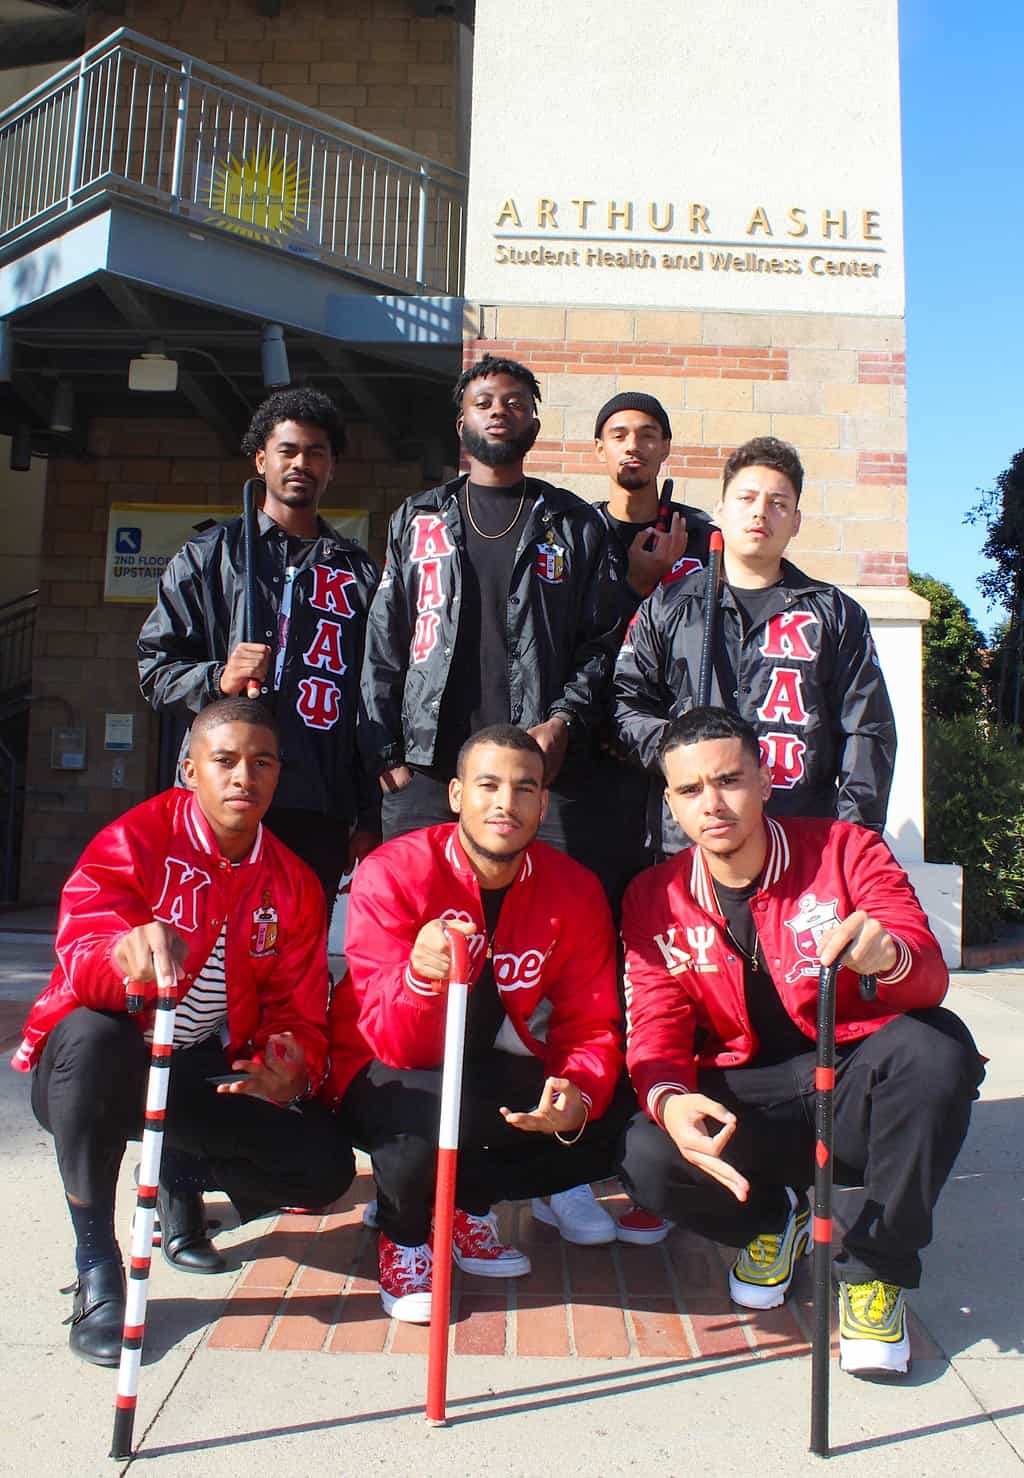 Members of Kappa Alpha Psi’s Upsilon chapter wearing fraternity jackets outside the Ashe Center on the UCLA campus